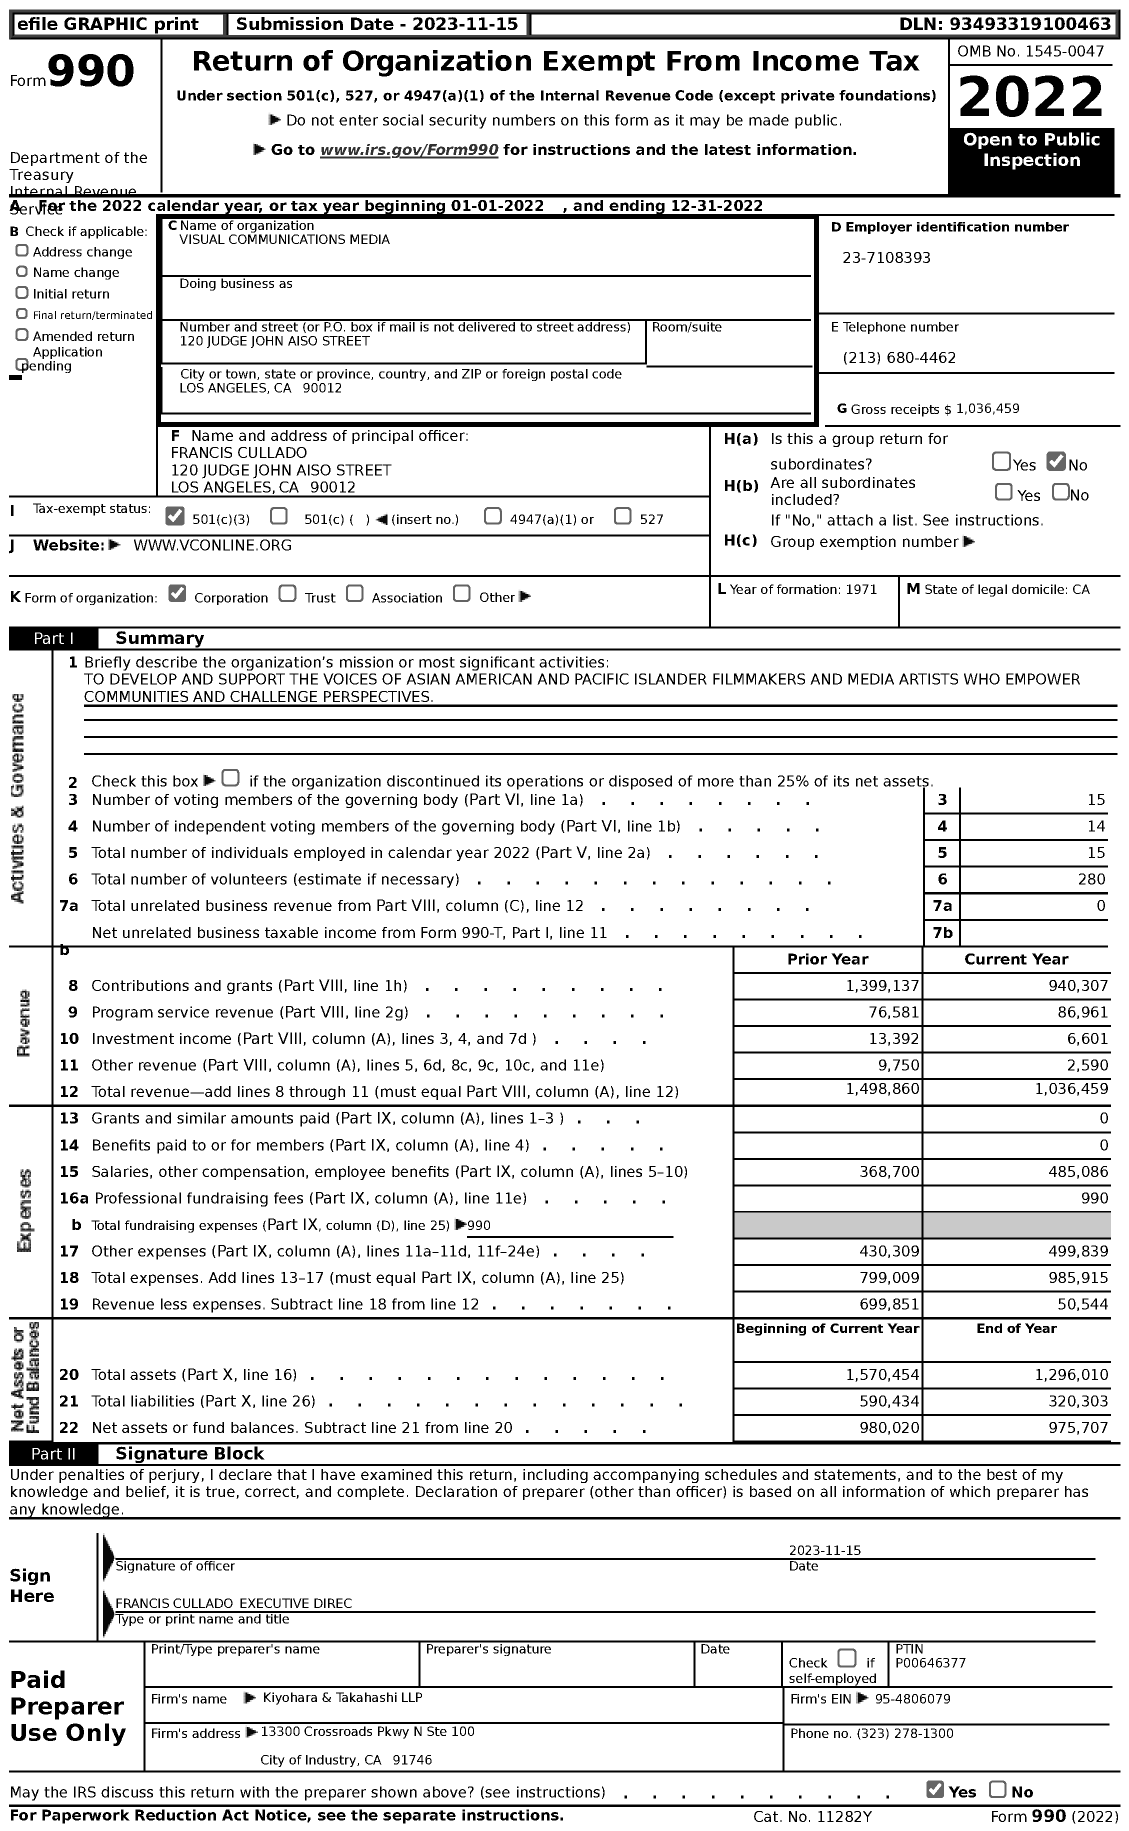 Image of first page of 2022 Form 990 for Visual Communications Media